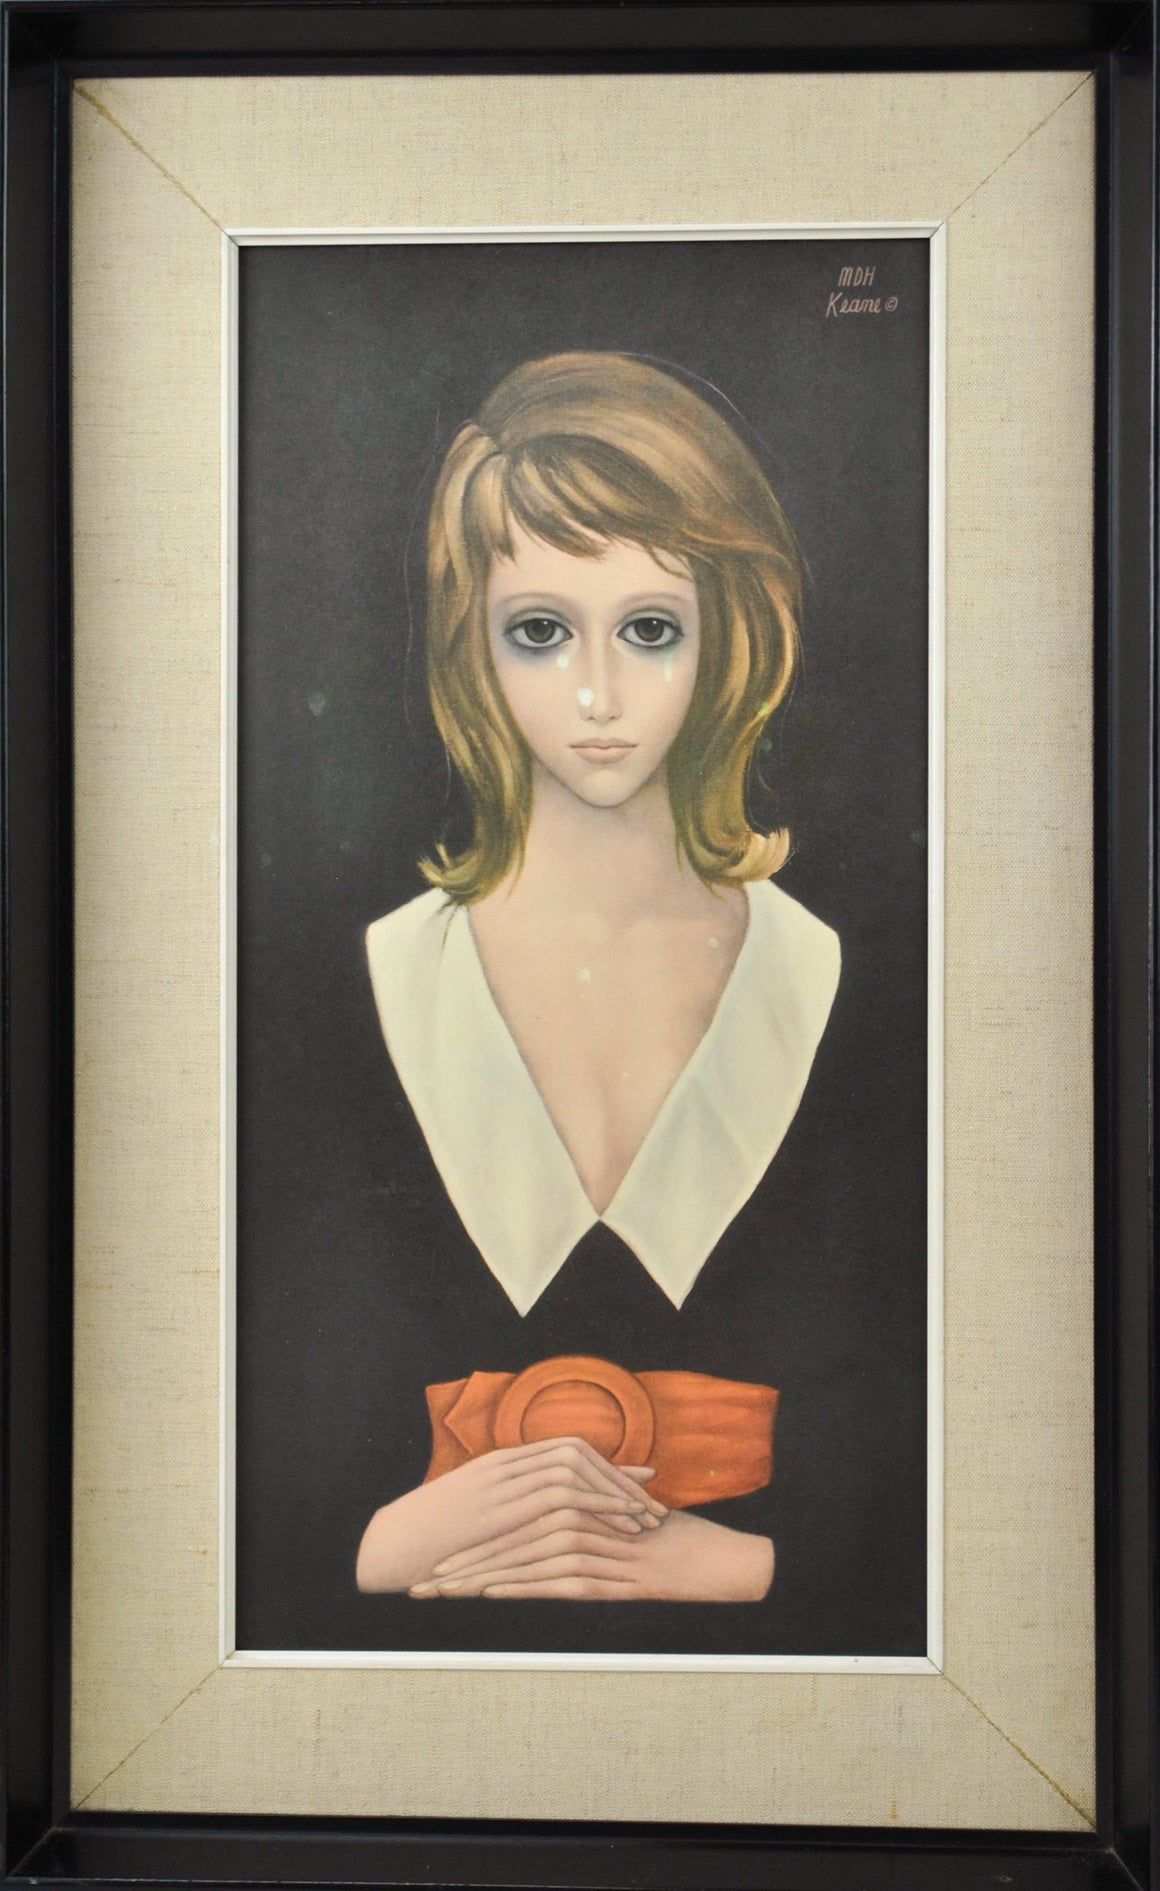 Margaret Keane - Young Woman - Offset Lithograph on Board